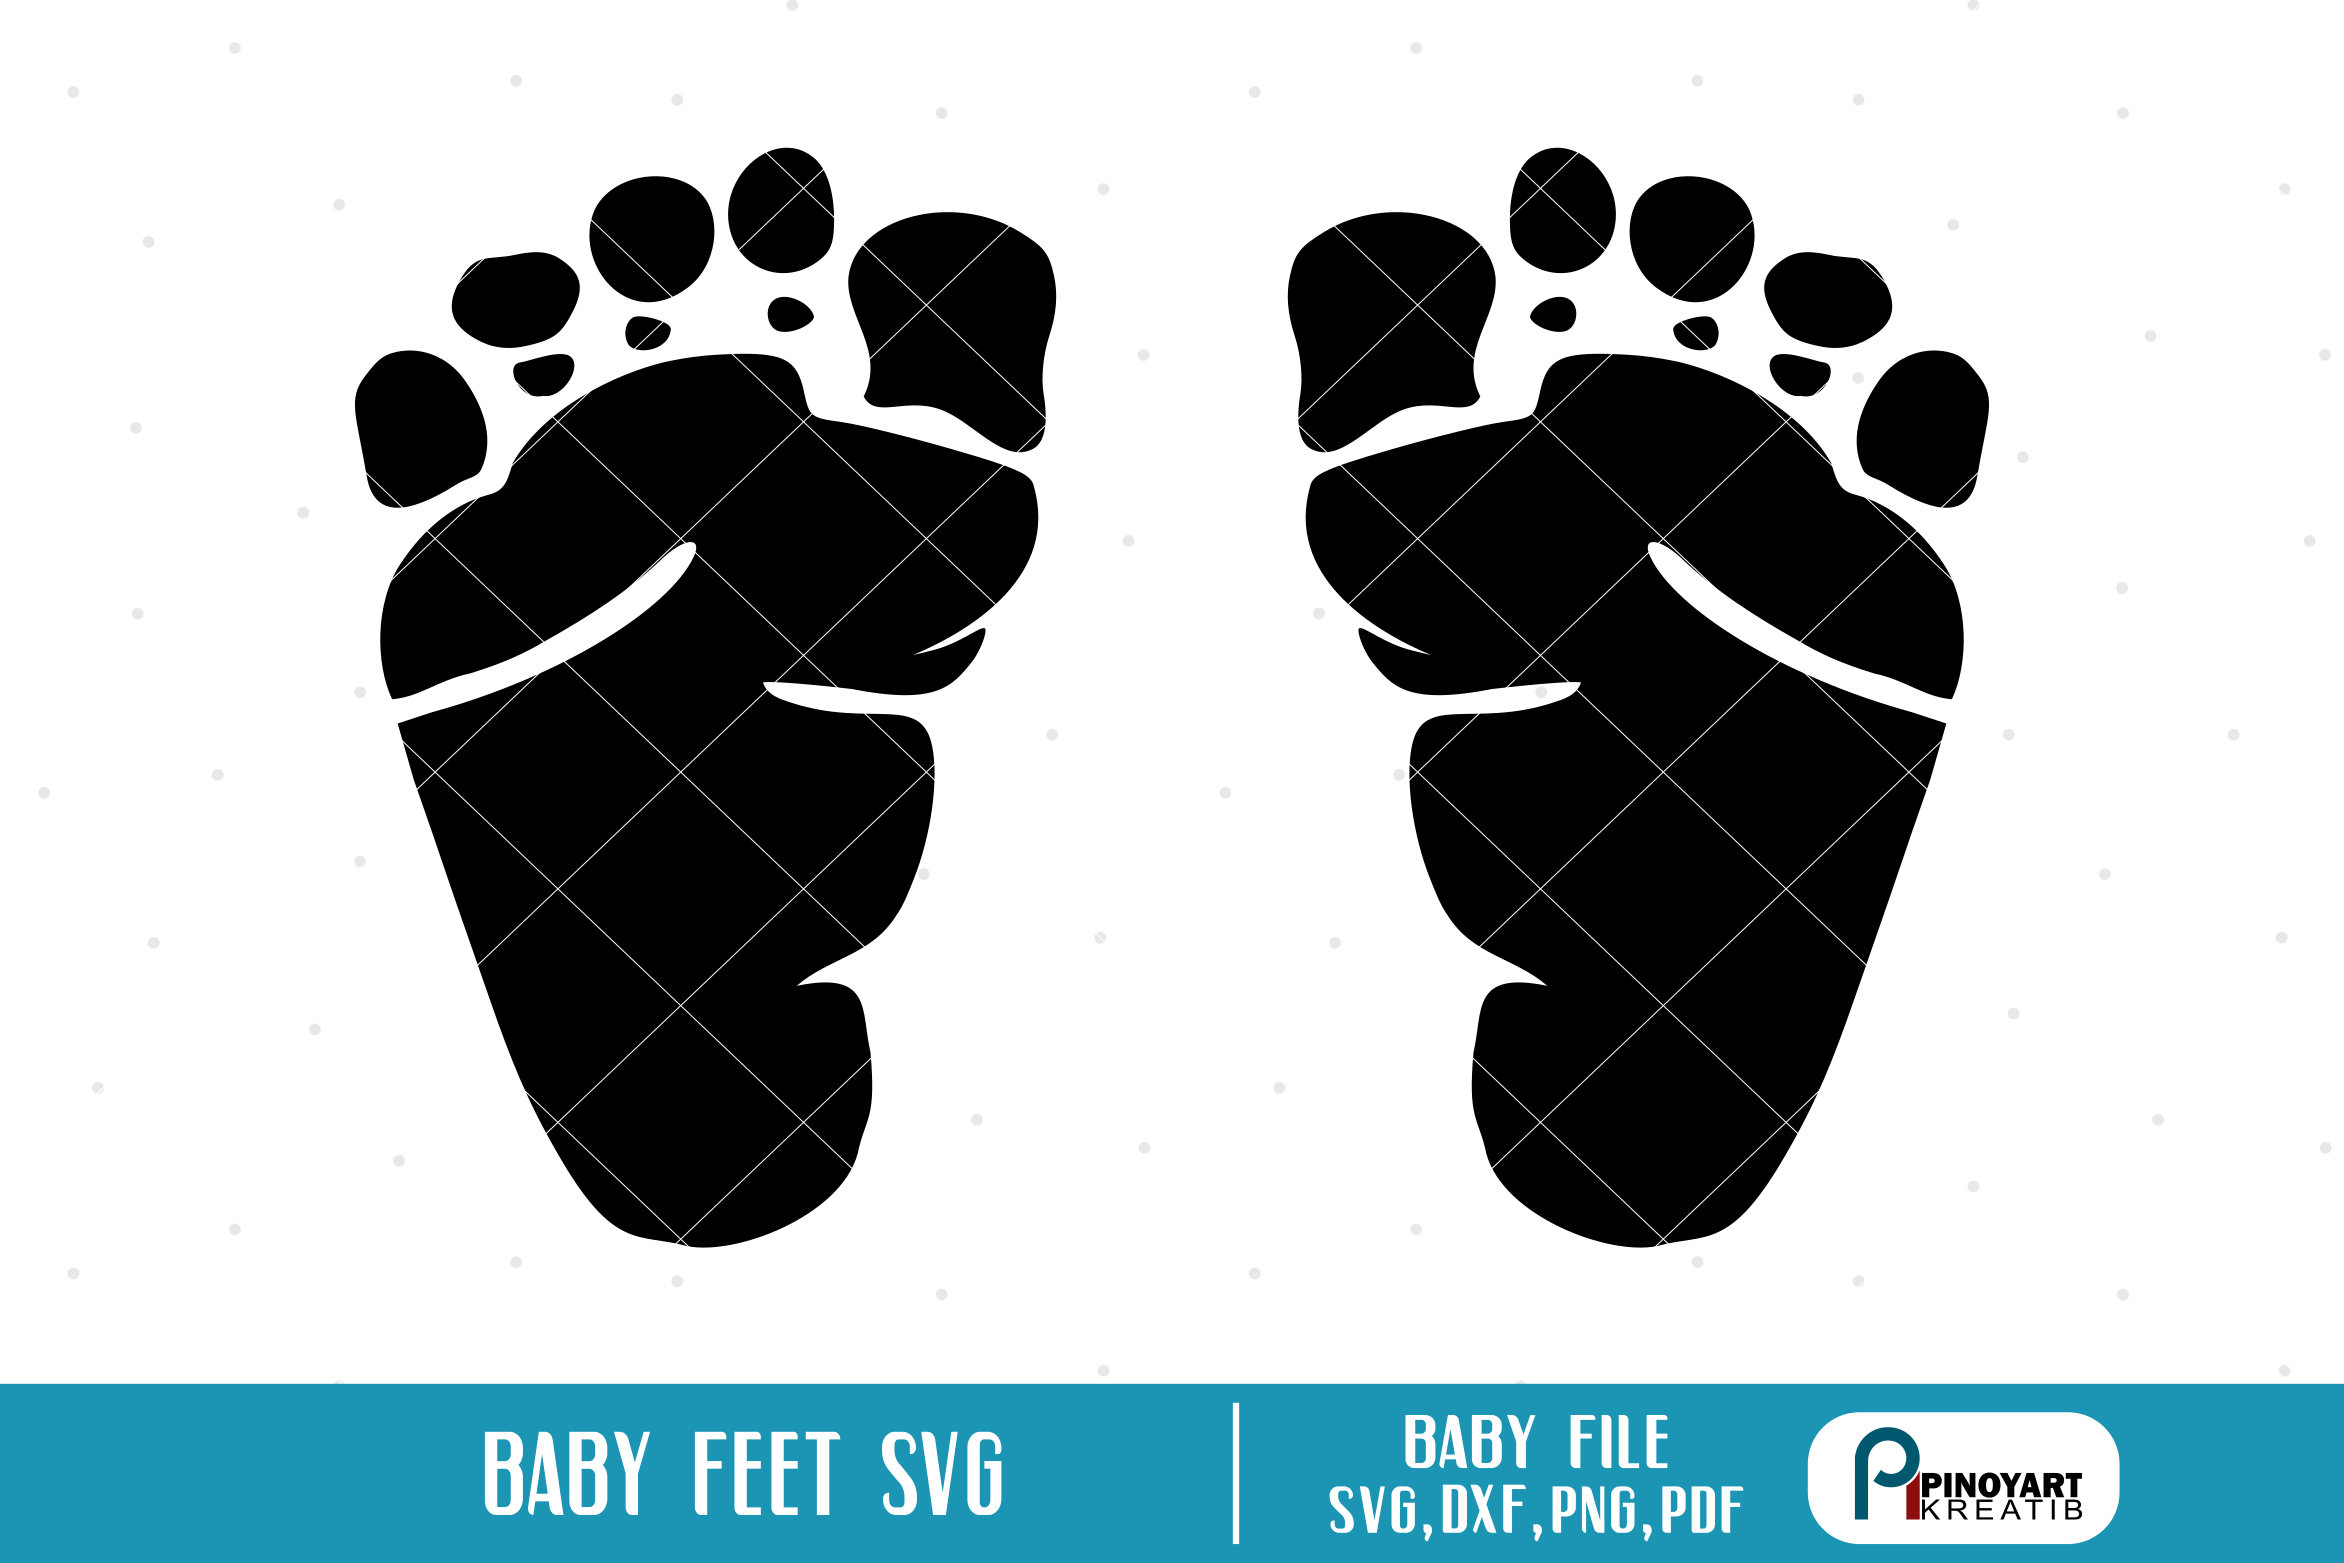 Download baby feet svg,baby svg,baby feet svg file,baby feet dxf ...